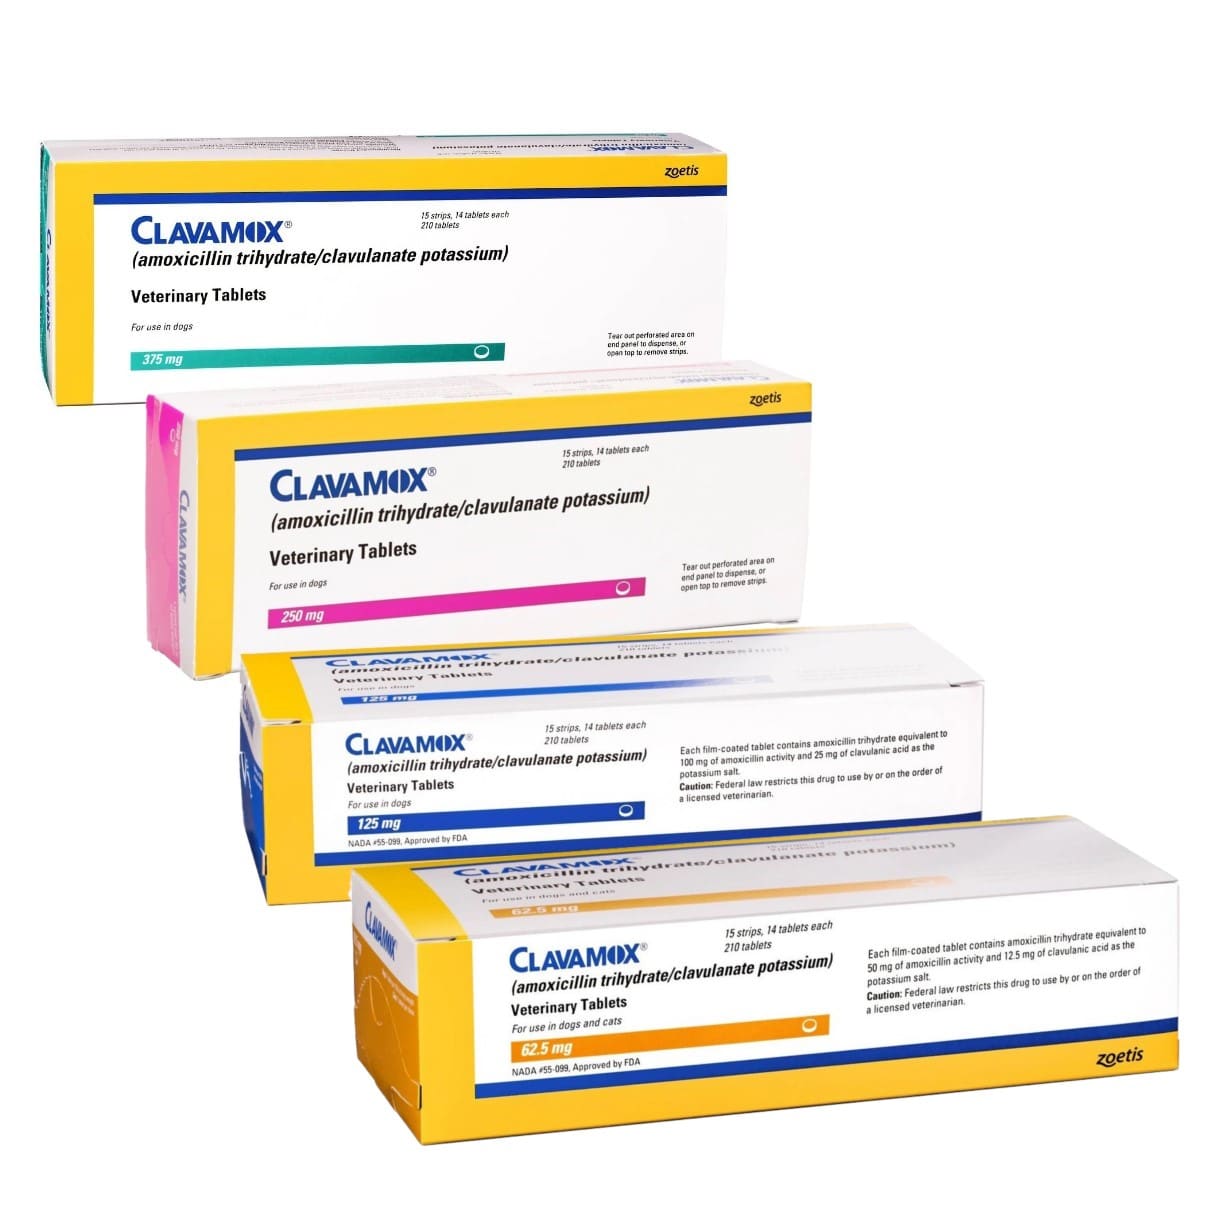 Clavamox (Amoxicillin / Clavulanate Potassium) Chewable Tablets for Dogs & Cats